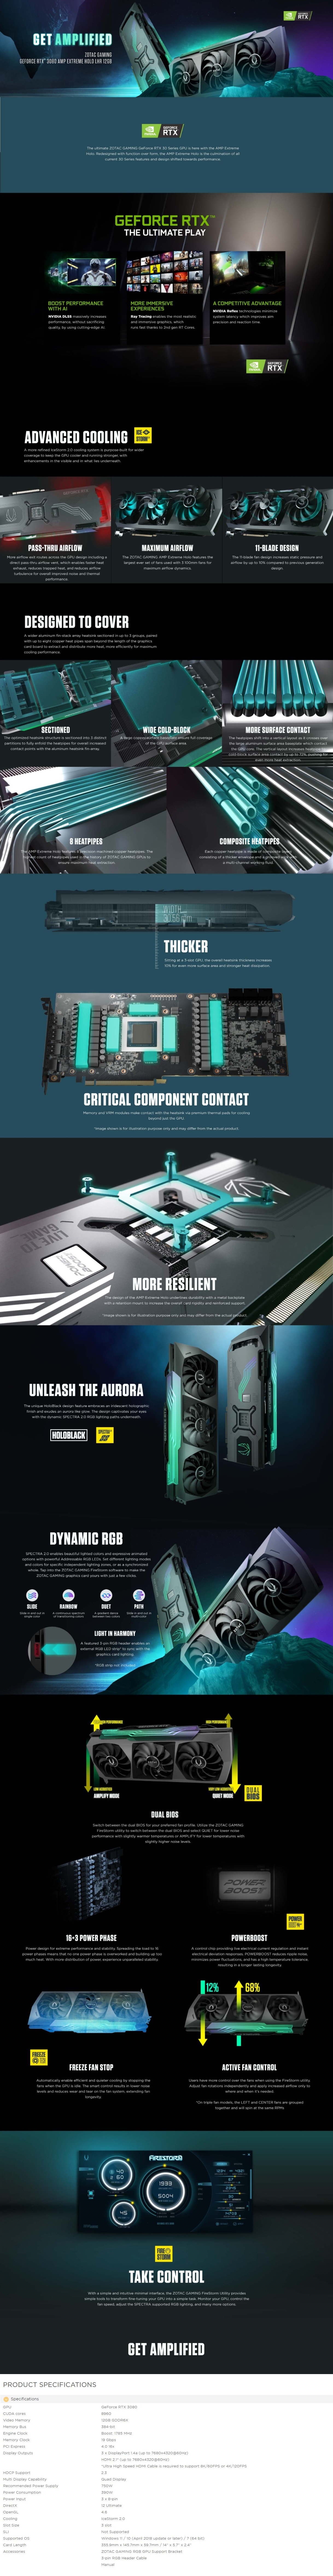 A large marketing image providing additional information about the product ZOTAC GAMING GeForce RTX 3080 AMP Extreme Holo LHR 12GB GDDR6X - Additional alt info not provided